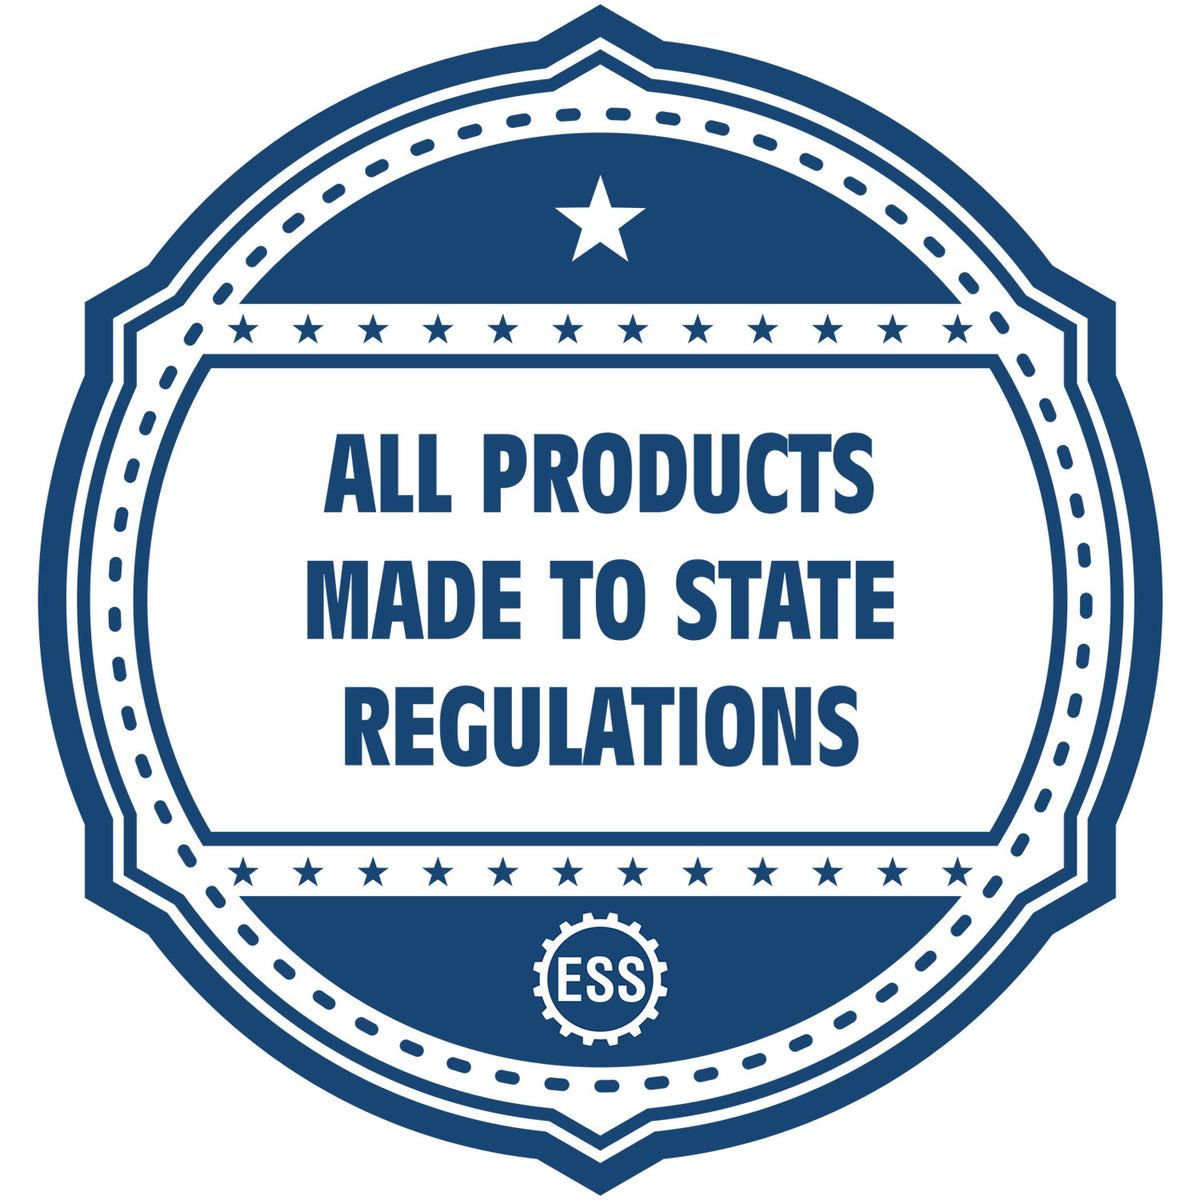 An icon or badge element for the Soft Pocket North Dakota Landscape Architect Embosser showing that this product is made in compliance with state regulations.